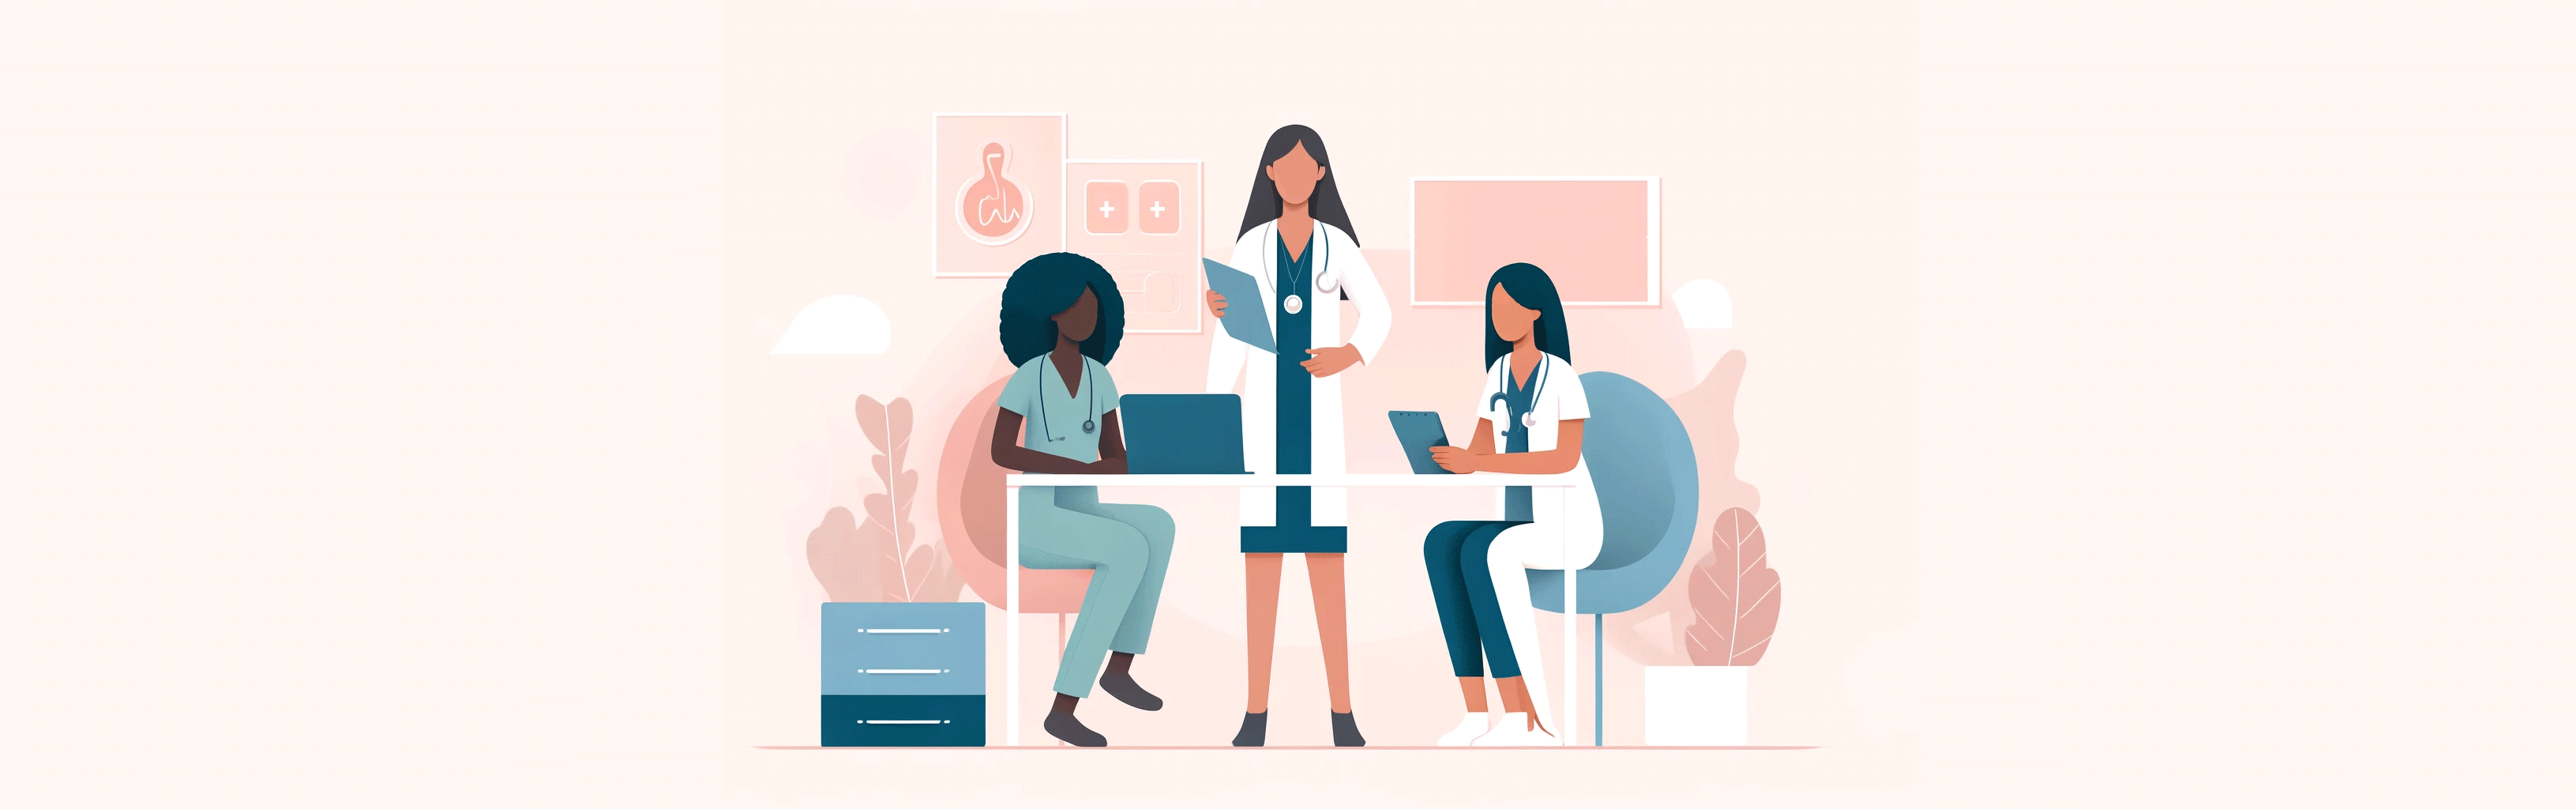 Modern, minimalist illustration of three diverse female health specialists at London Pregnancy Clinic, dressed in medical scrubs, working with medical charts and a laptop in a clean, clinical setting, designed in flat graphic style with soft pastel colors, representing inclusivity and professionalism in women's health.